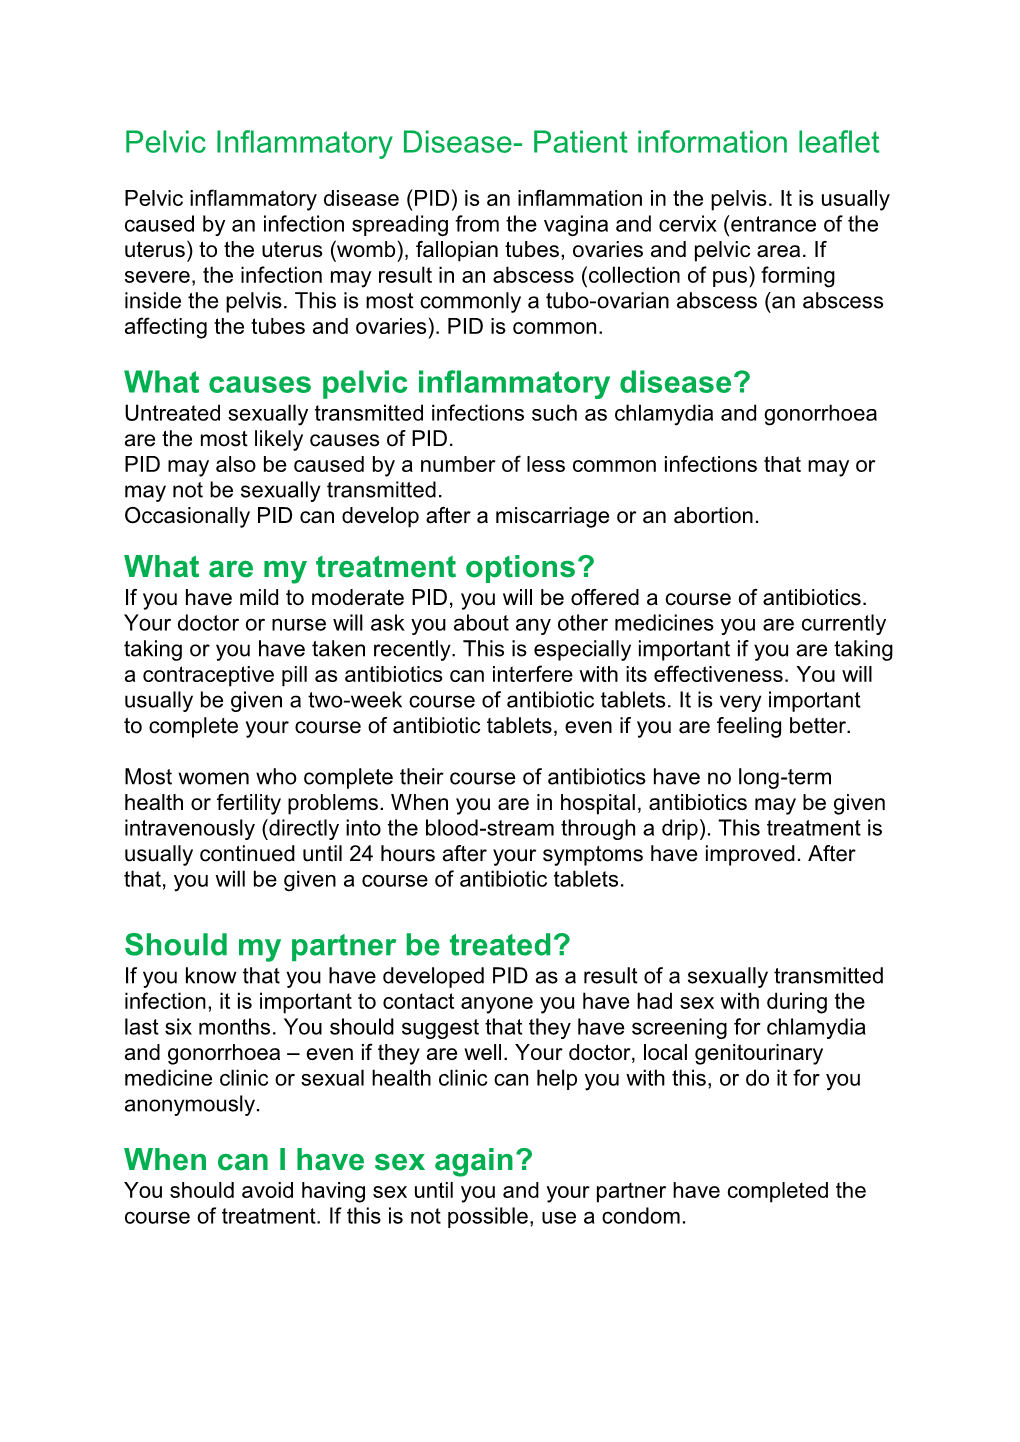 Patient Information Leaflet What Causes Pelvic Inflammatory Disease?